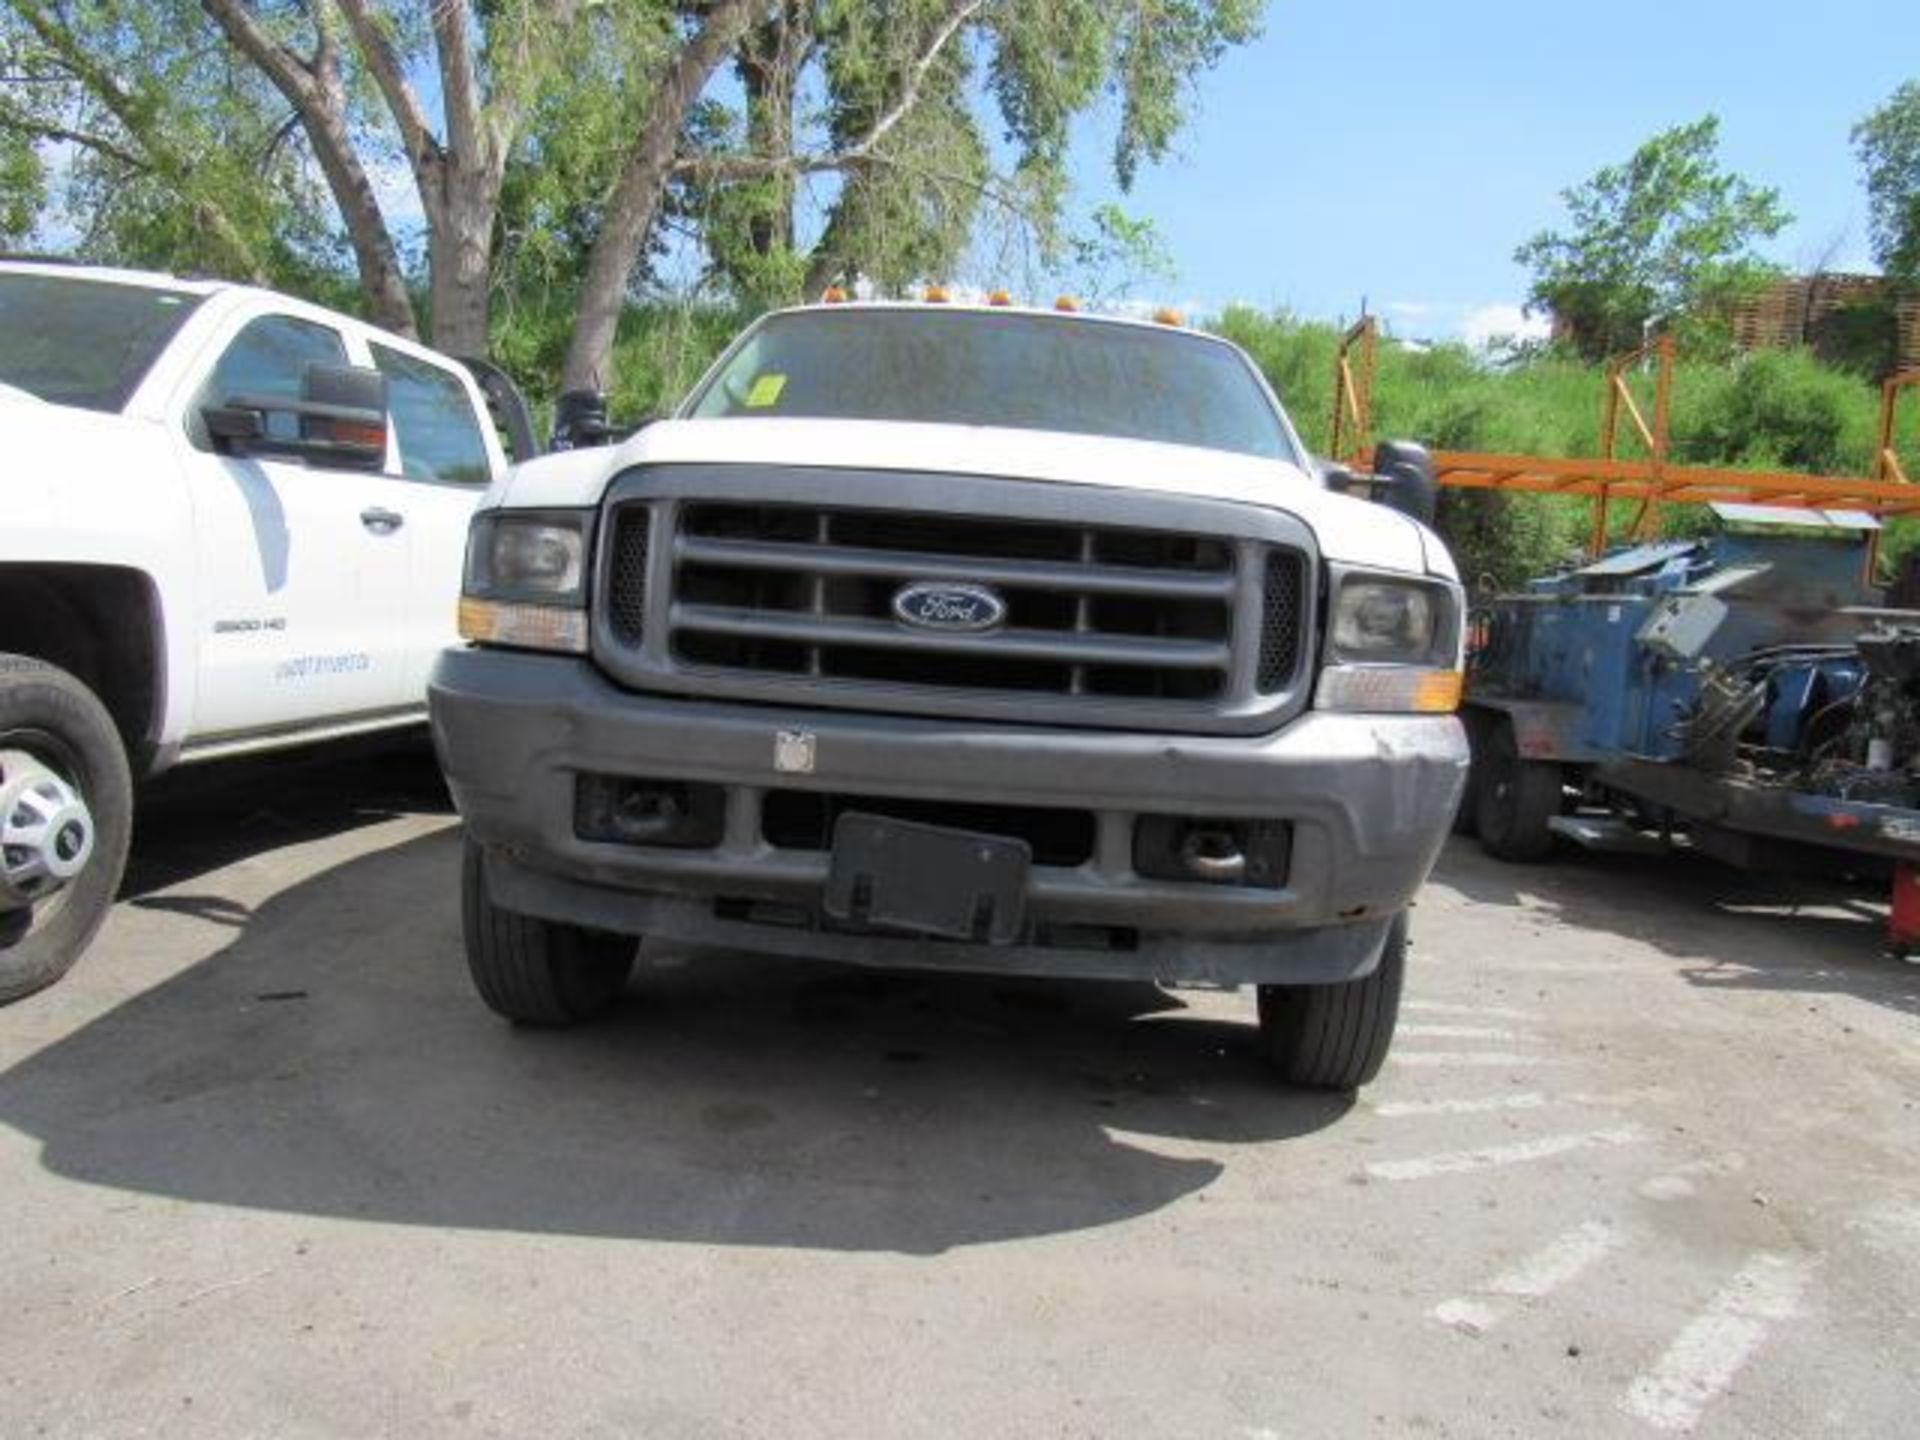 2004 Ford F550 11 ft. Flatbed Superduty 4 x 4, VIN # 1FDAW57PX4EB03420, Crew Cab, Goose Neck - Image 2 of 9